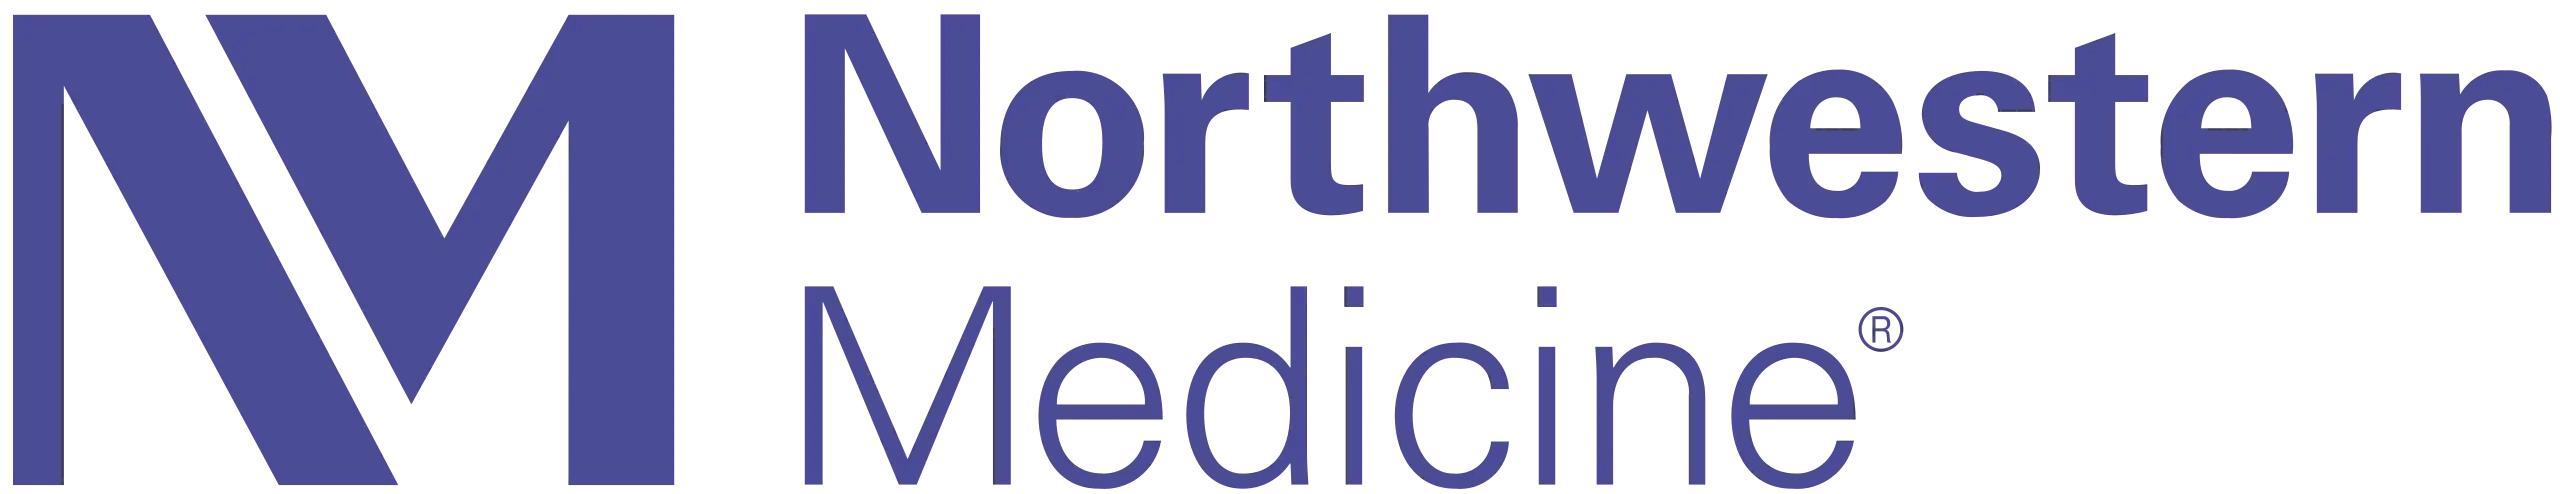 Northwestern Medicine Prentice Hospital: How to Obtain Social Security & Birth Certificate for Your Newborn Child